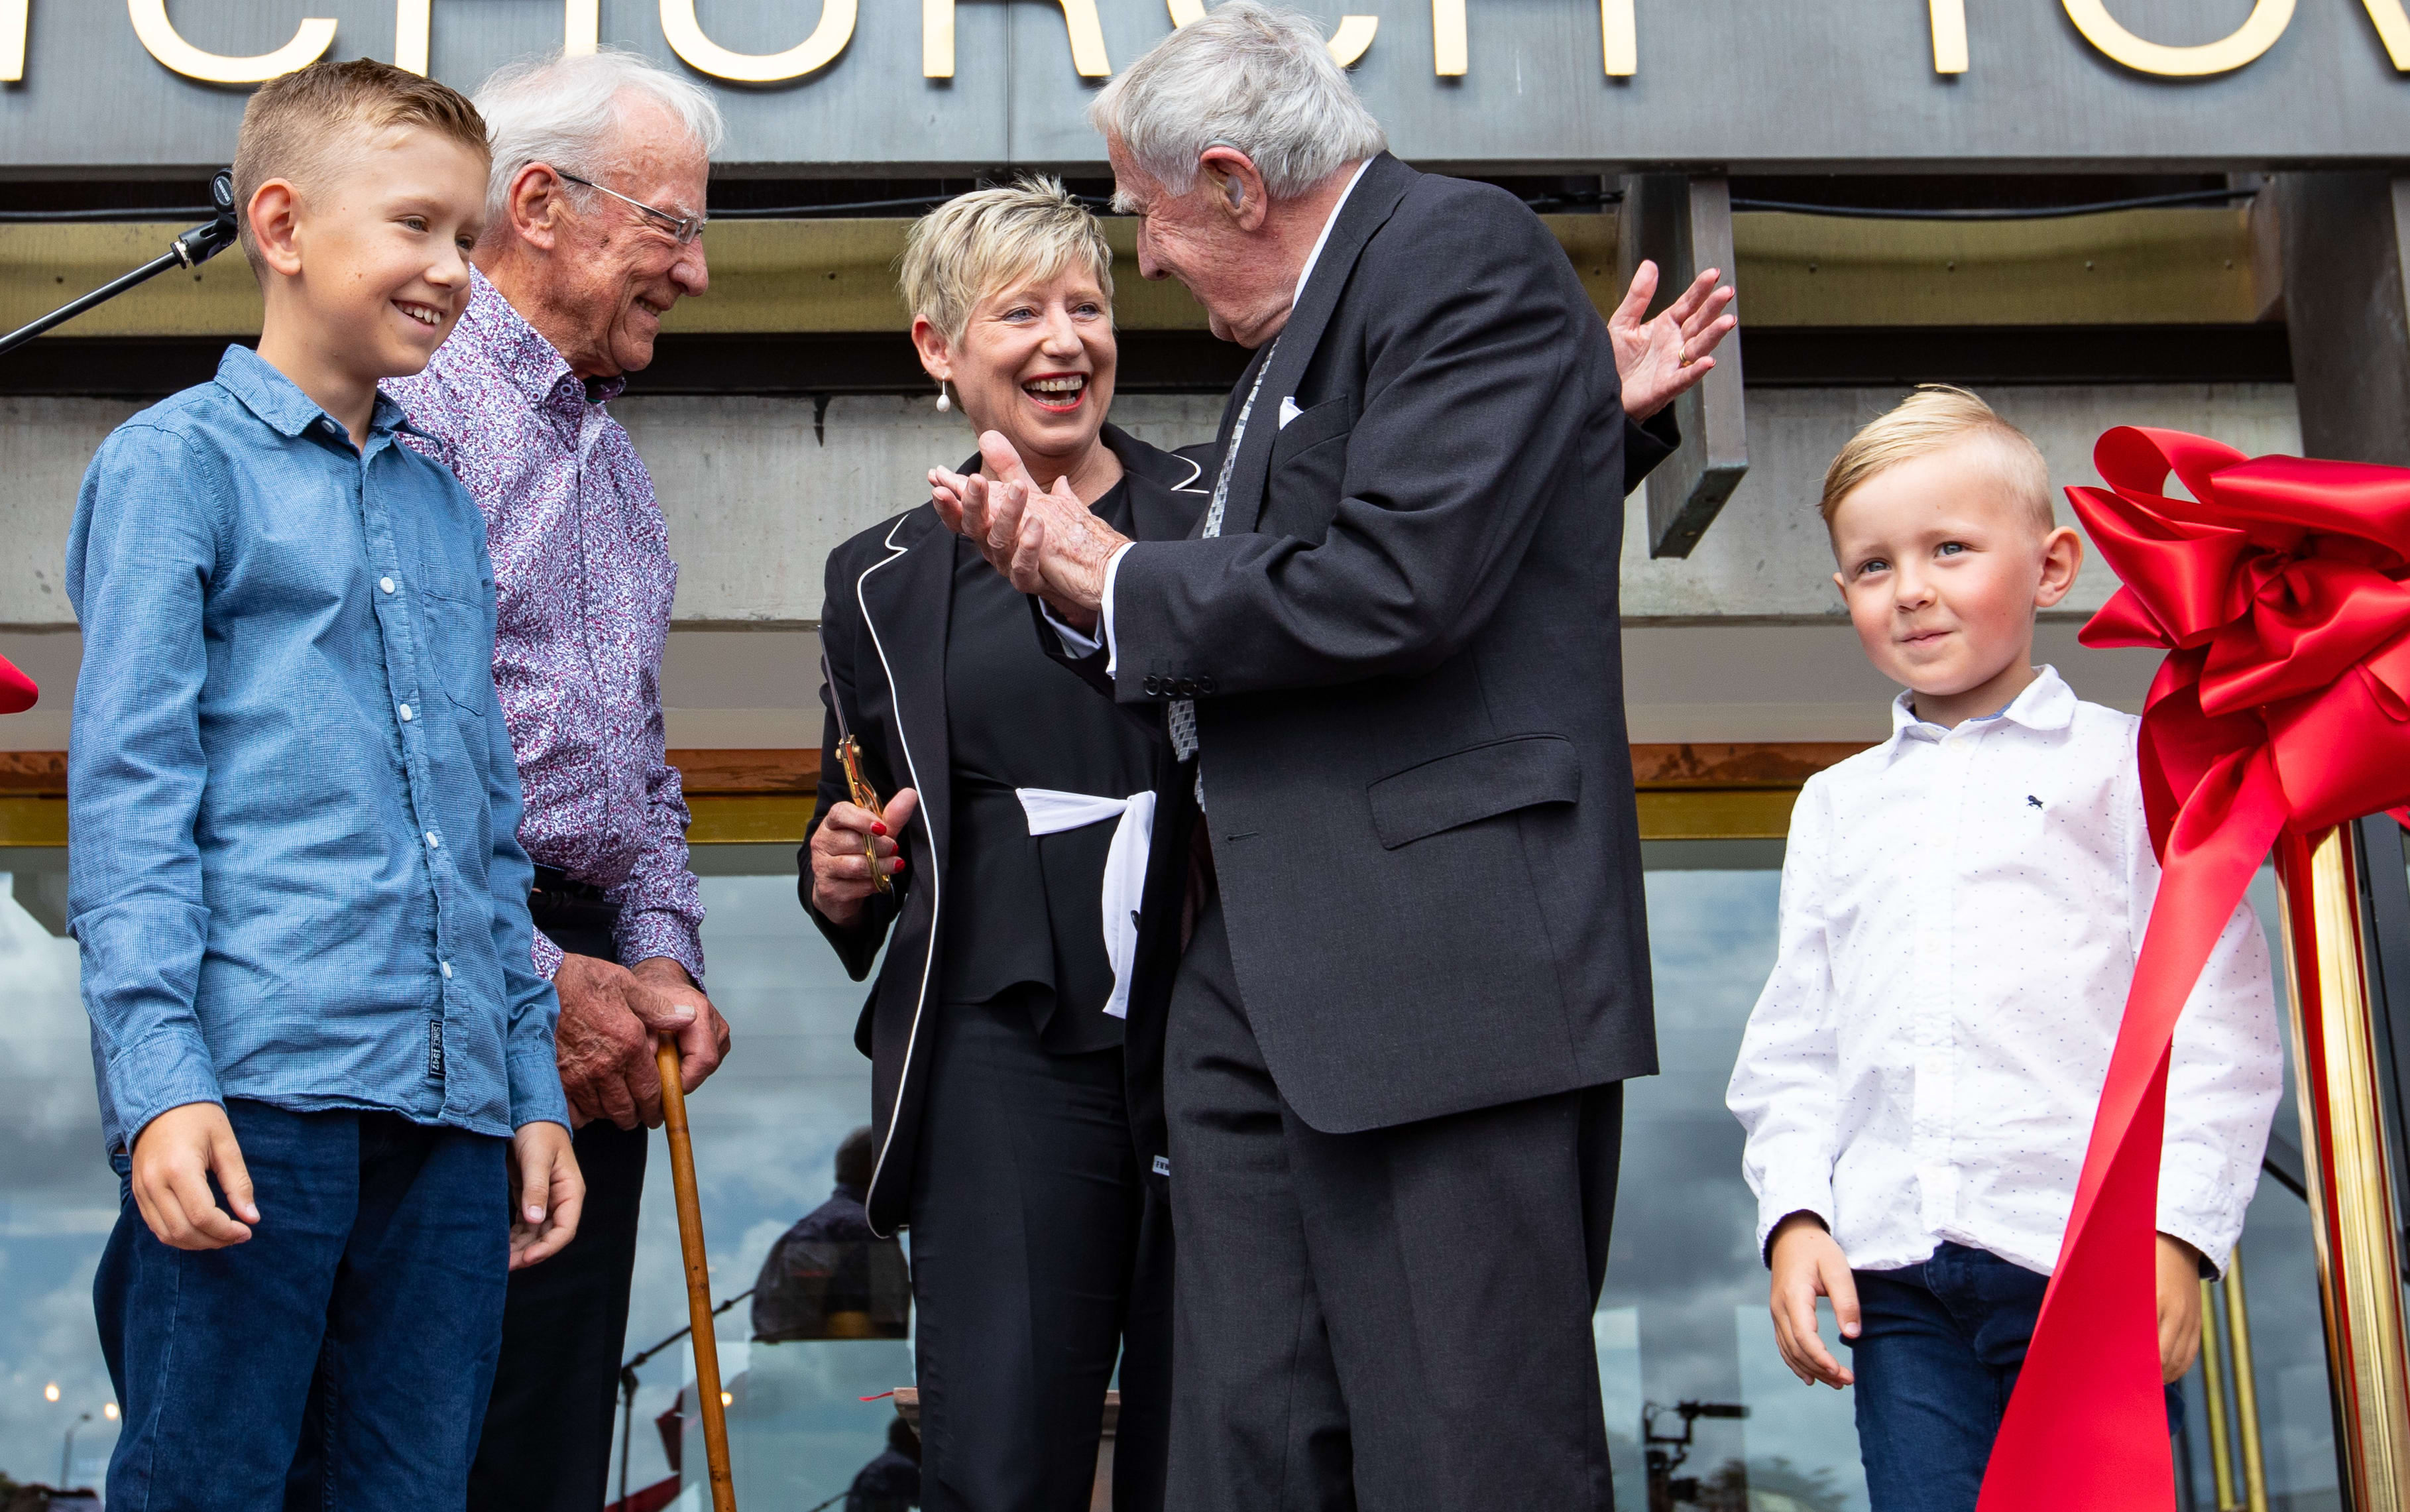 Sir Harold Marshall, Lianne Dalziel, Sir Miles Warren, and Gus and Connor Jensen